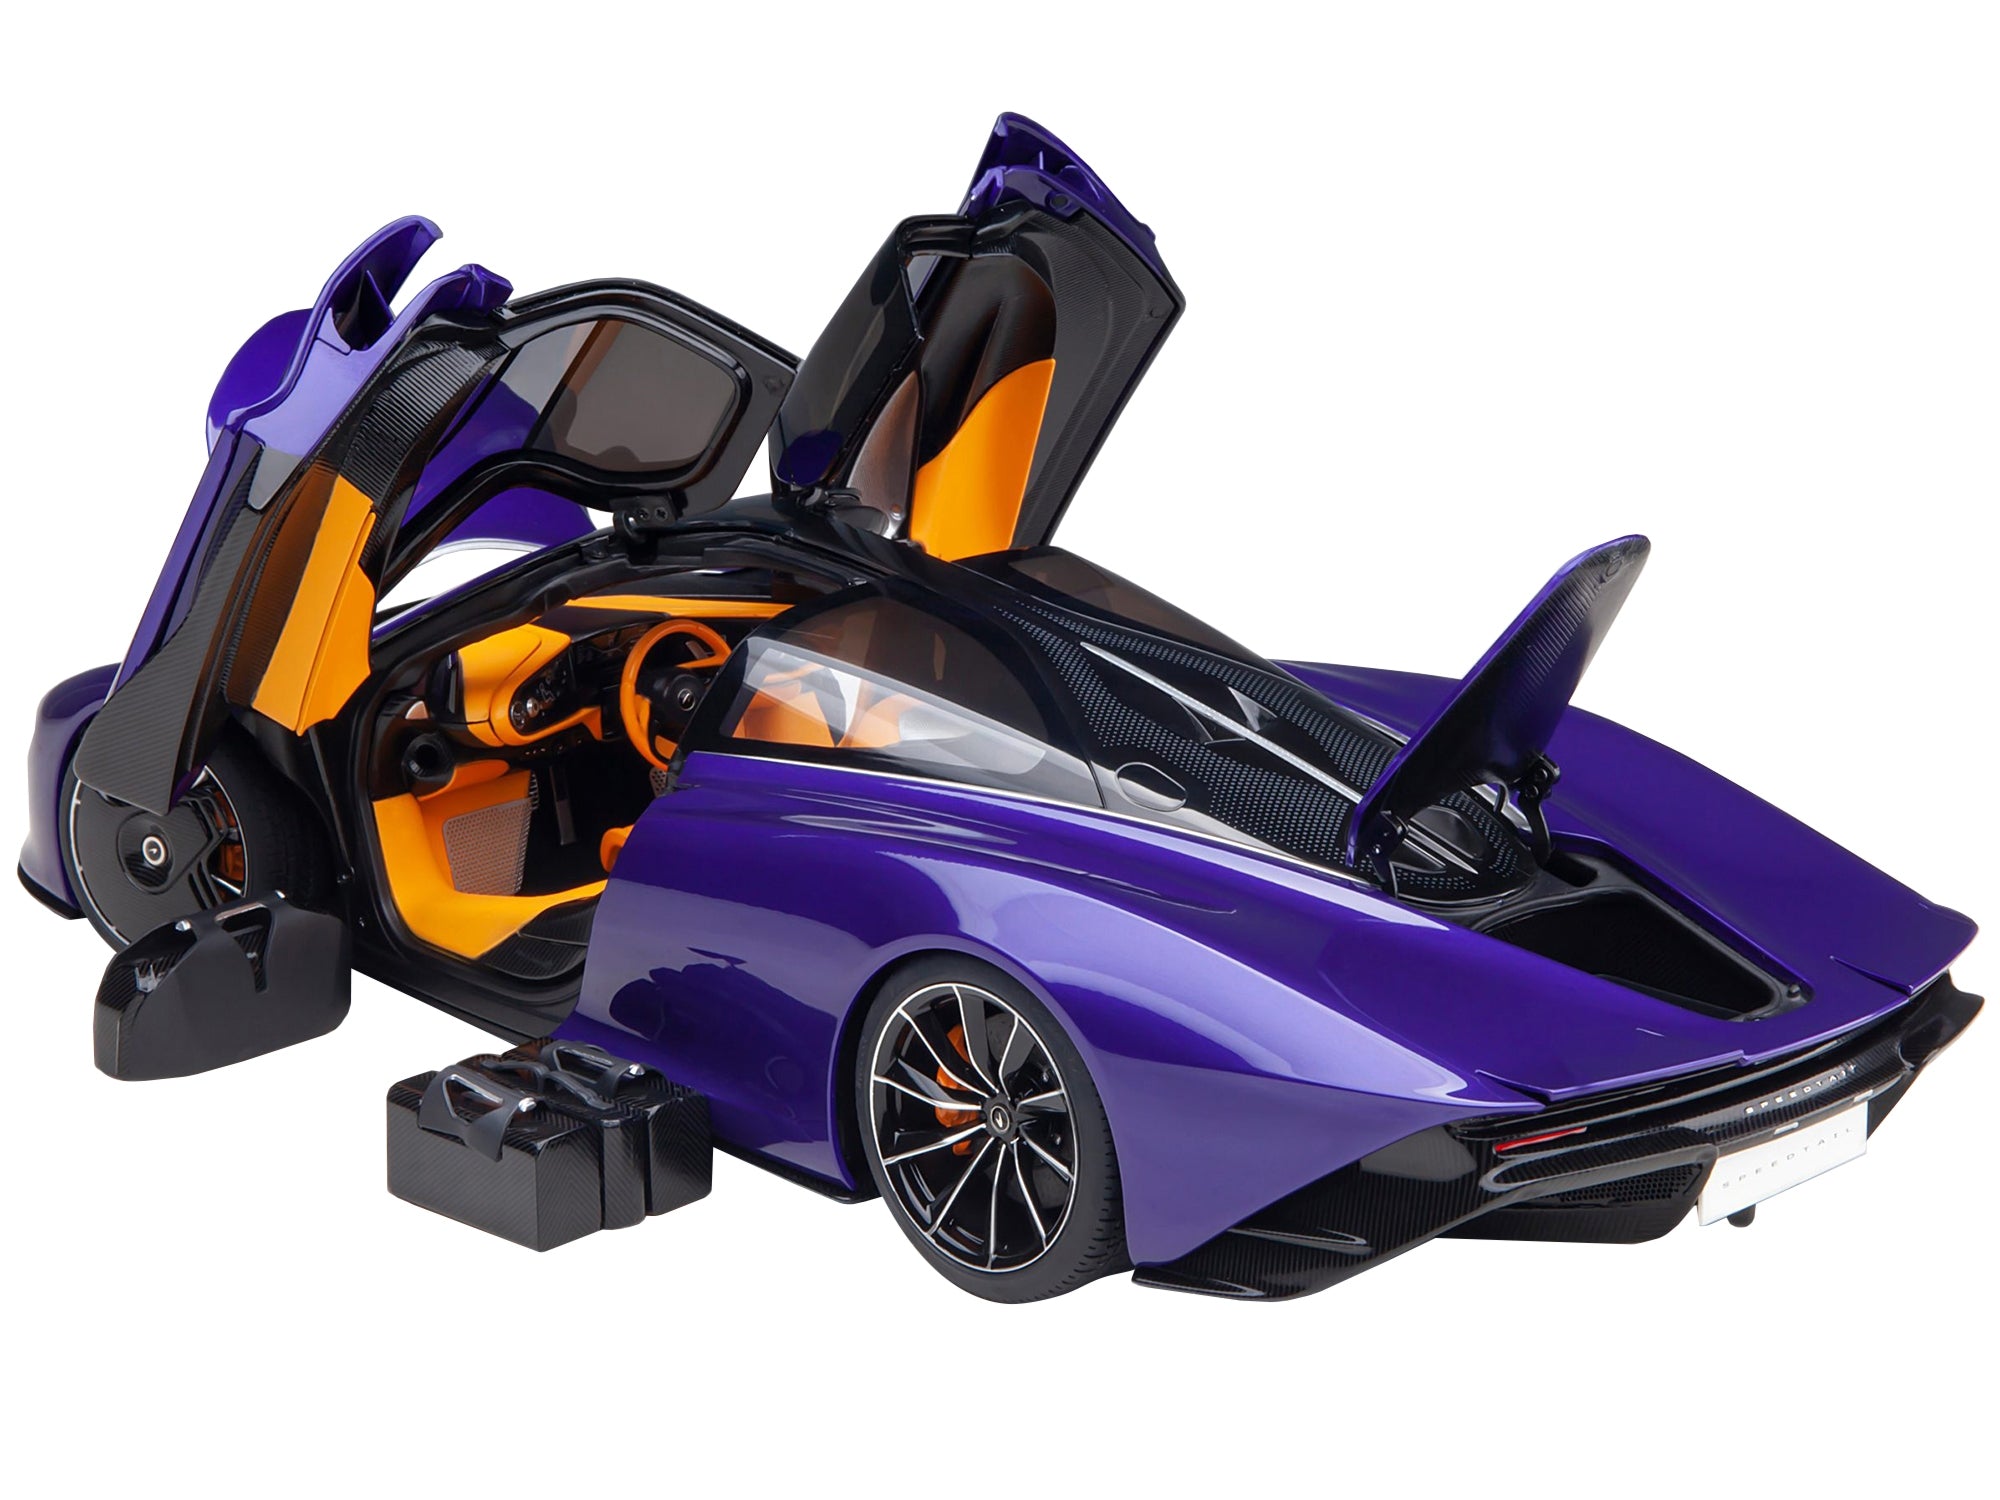 McLaren Speedtail Lantana Purple Metallic with Black Top and Yellow Interior and Suitcase Accessories  1/18 Model Car by Autoart